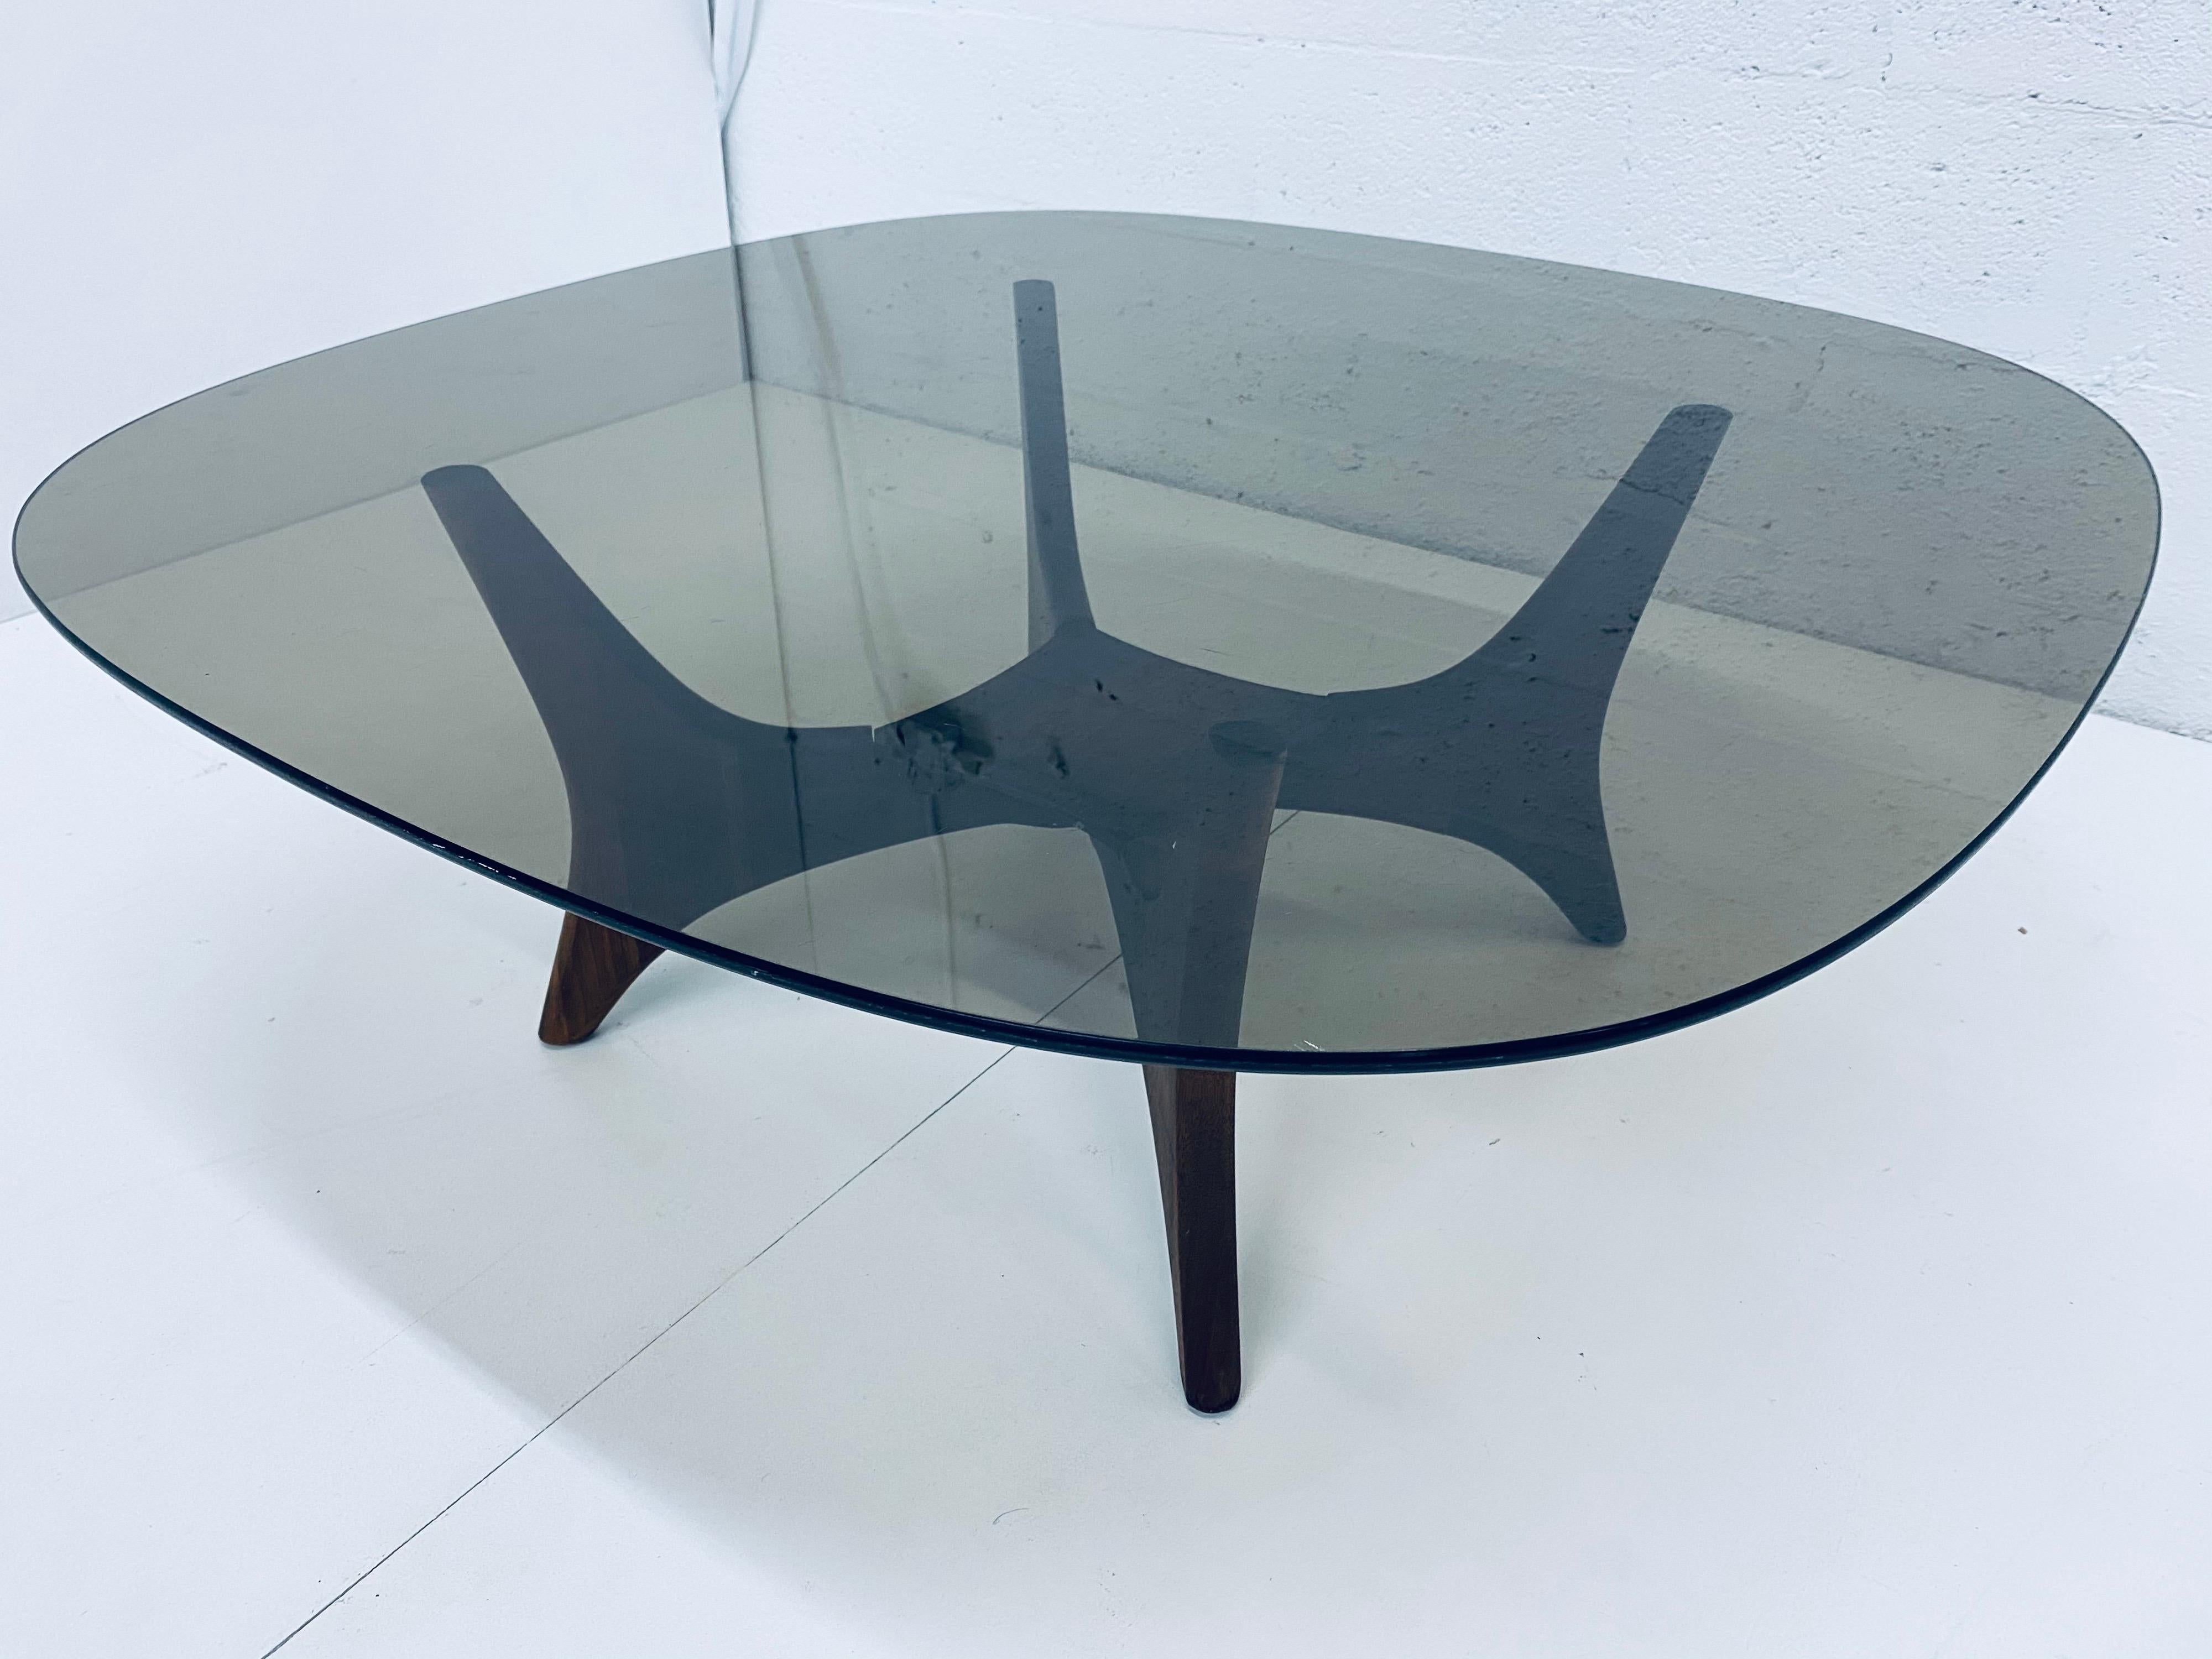 Midcentury walnut base coffee table with a space for a planter and smoked glass top by Adrian Pearsall. 

Planter space dimensions:
W8